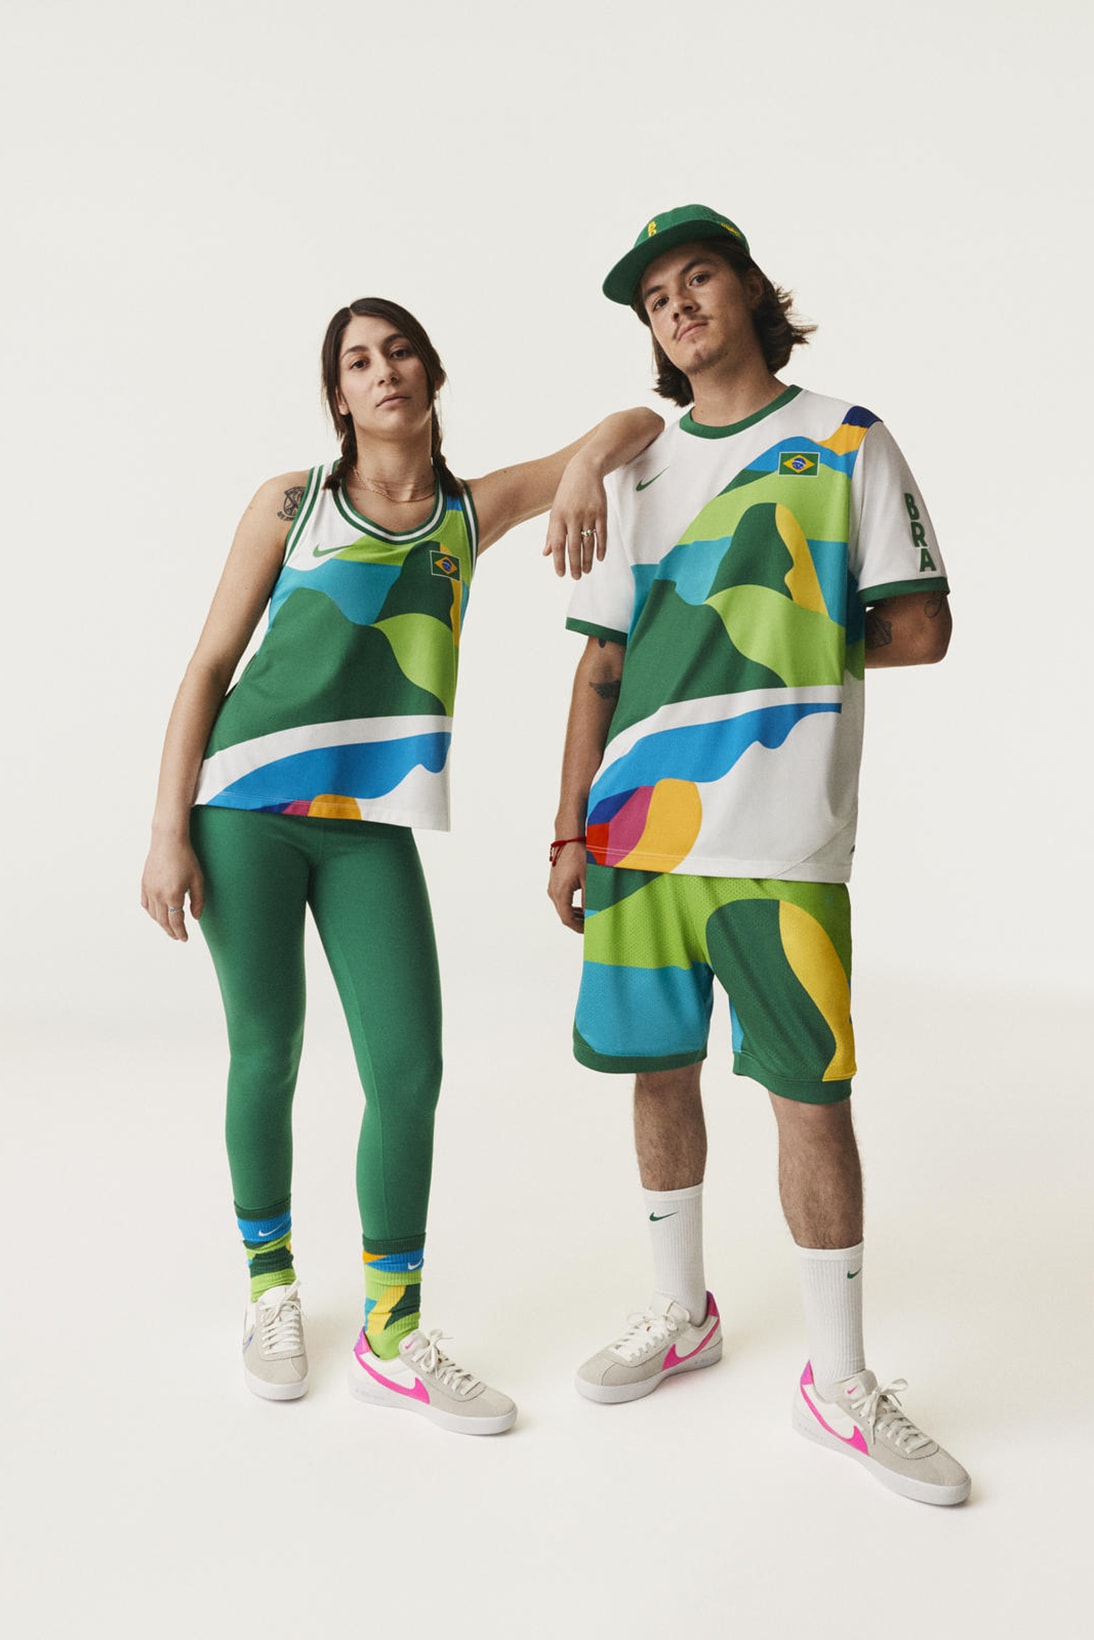 nike tokyo olympics competition federation uniforms sustainable basketball track and field skateboarding athletes sports